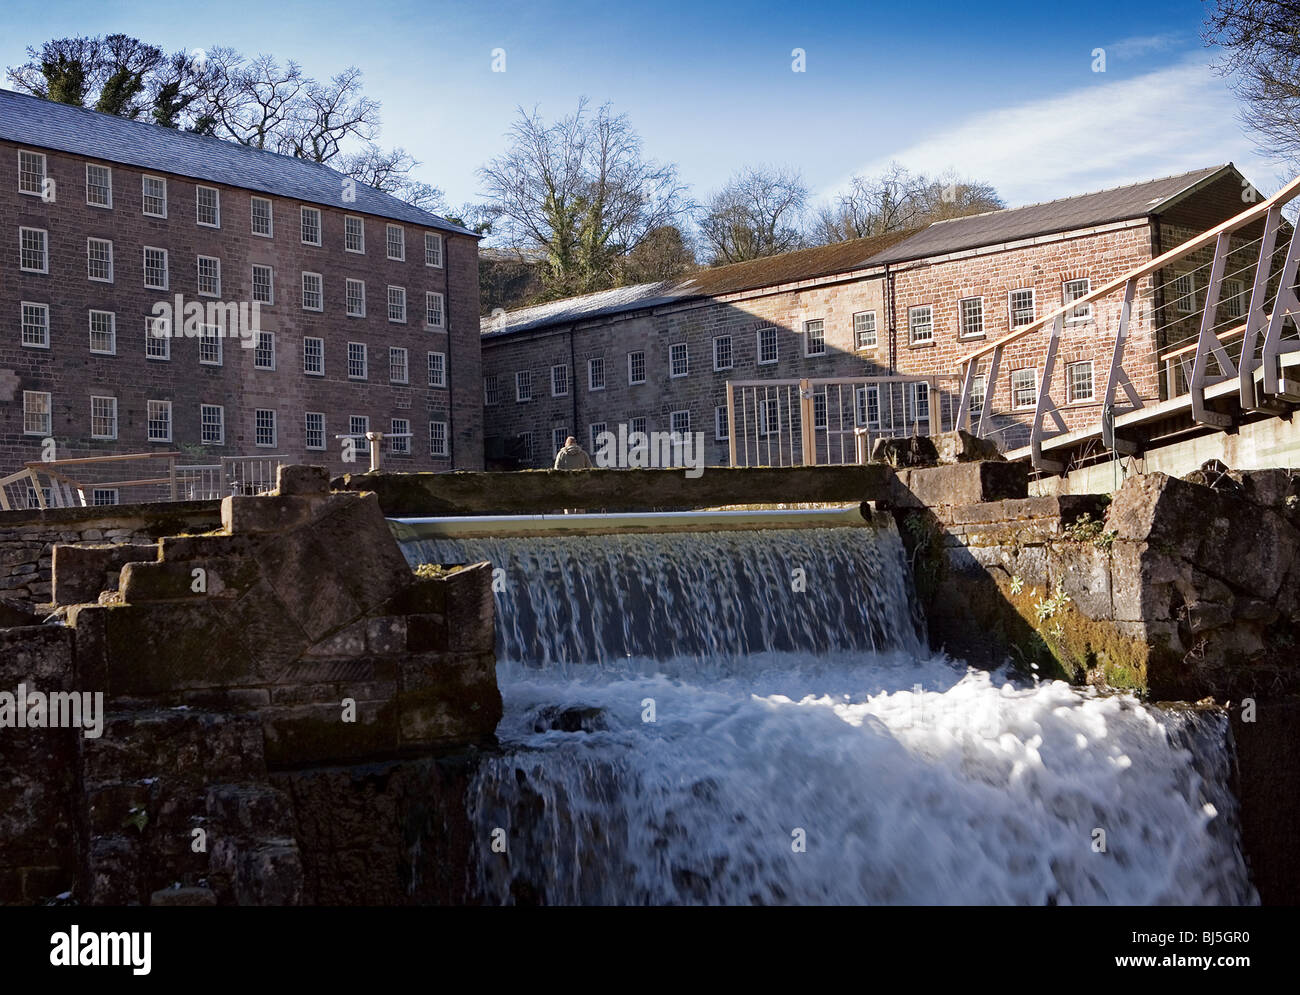 Richard Arkwright's Mill à Cromford, Derbyshire, Angleterre Banque D'Images